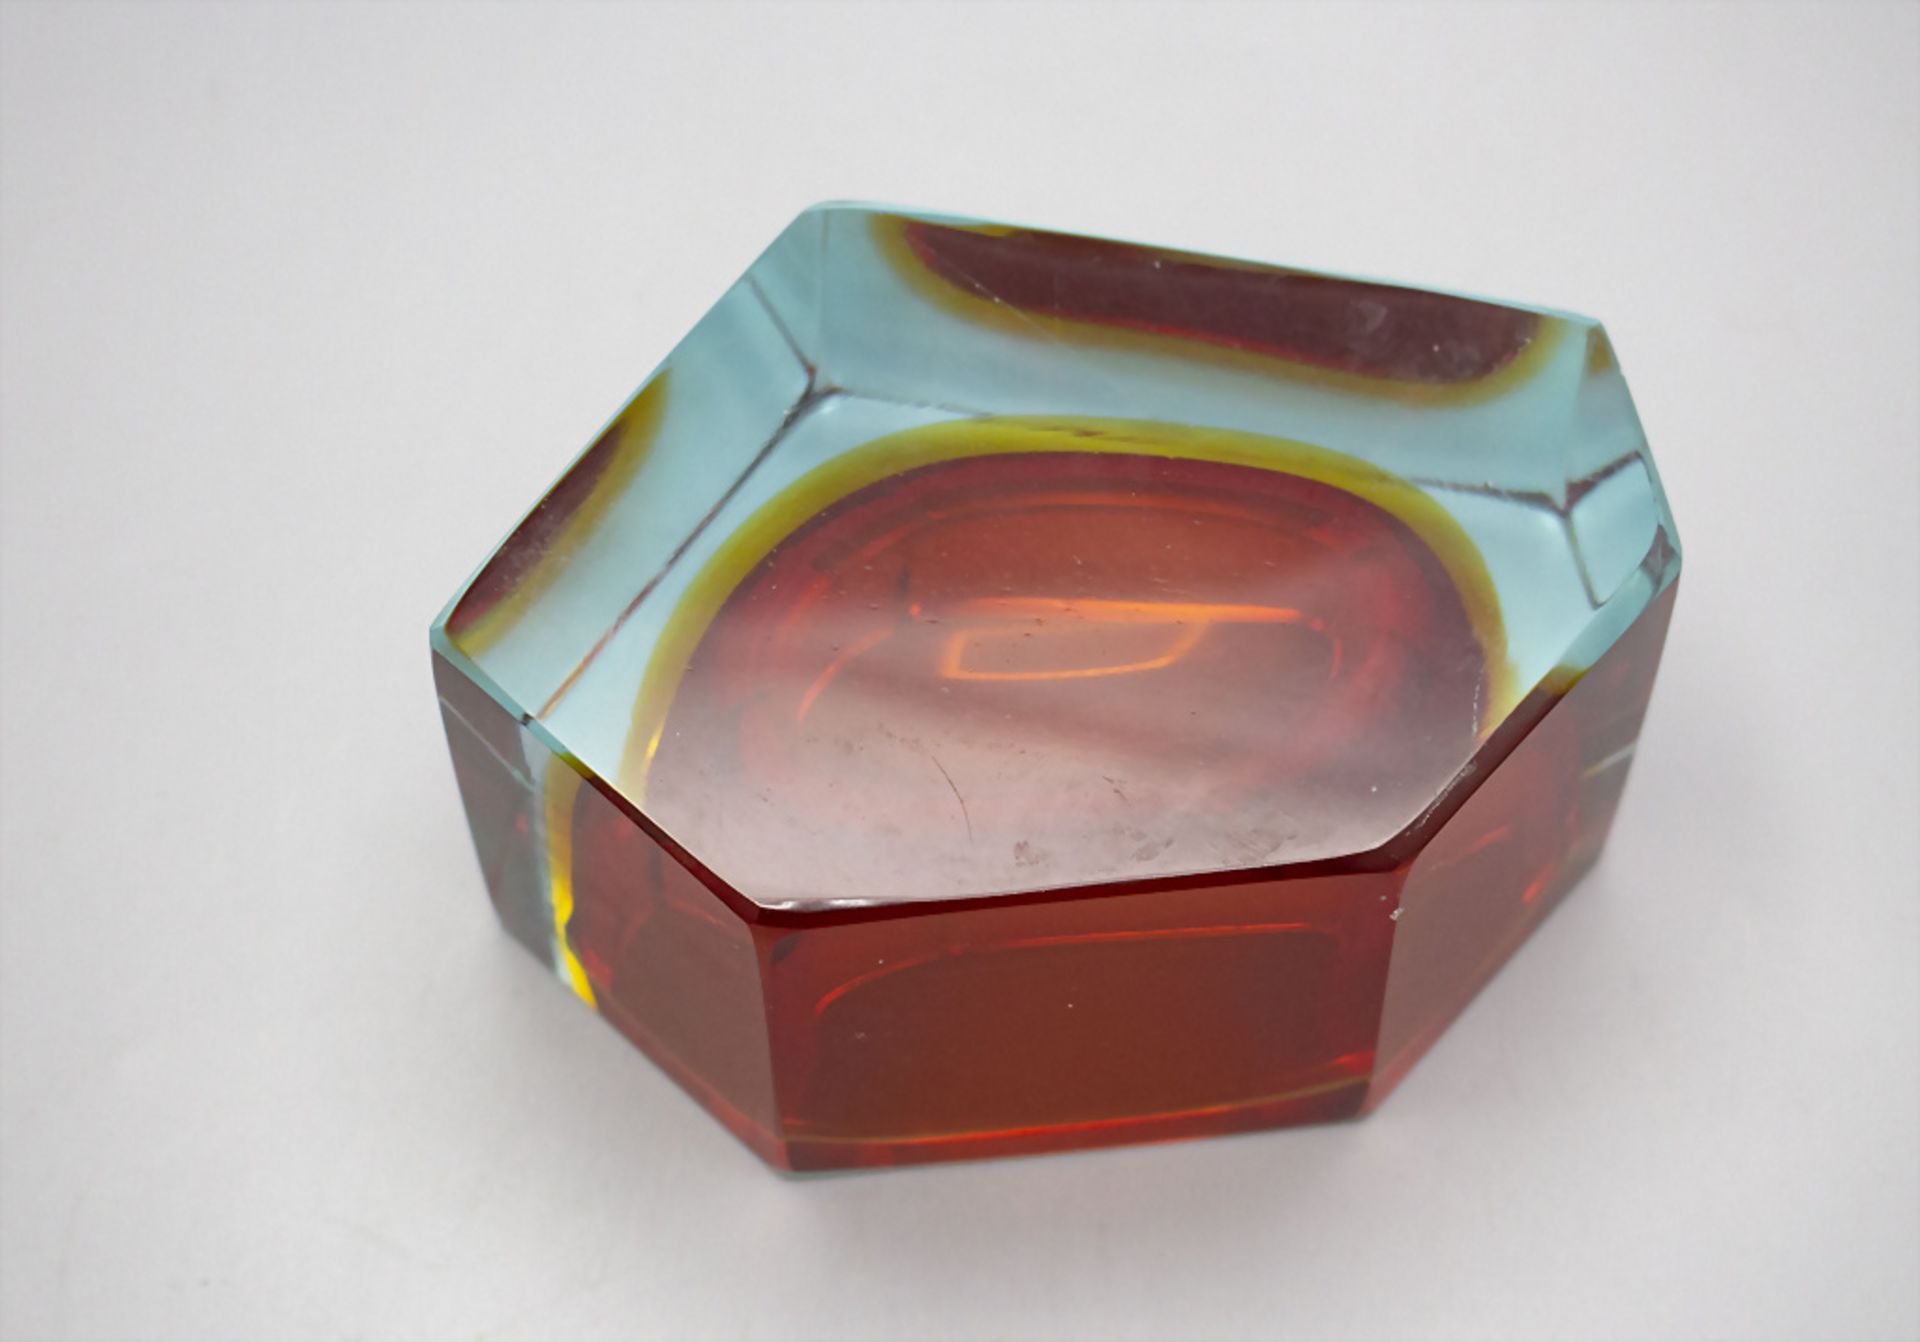 Aschenbecher / An ashtray, wohl Murano, 70/80er Jahre - Image 3 of 4